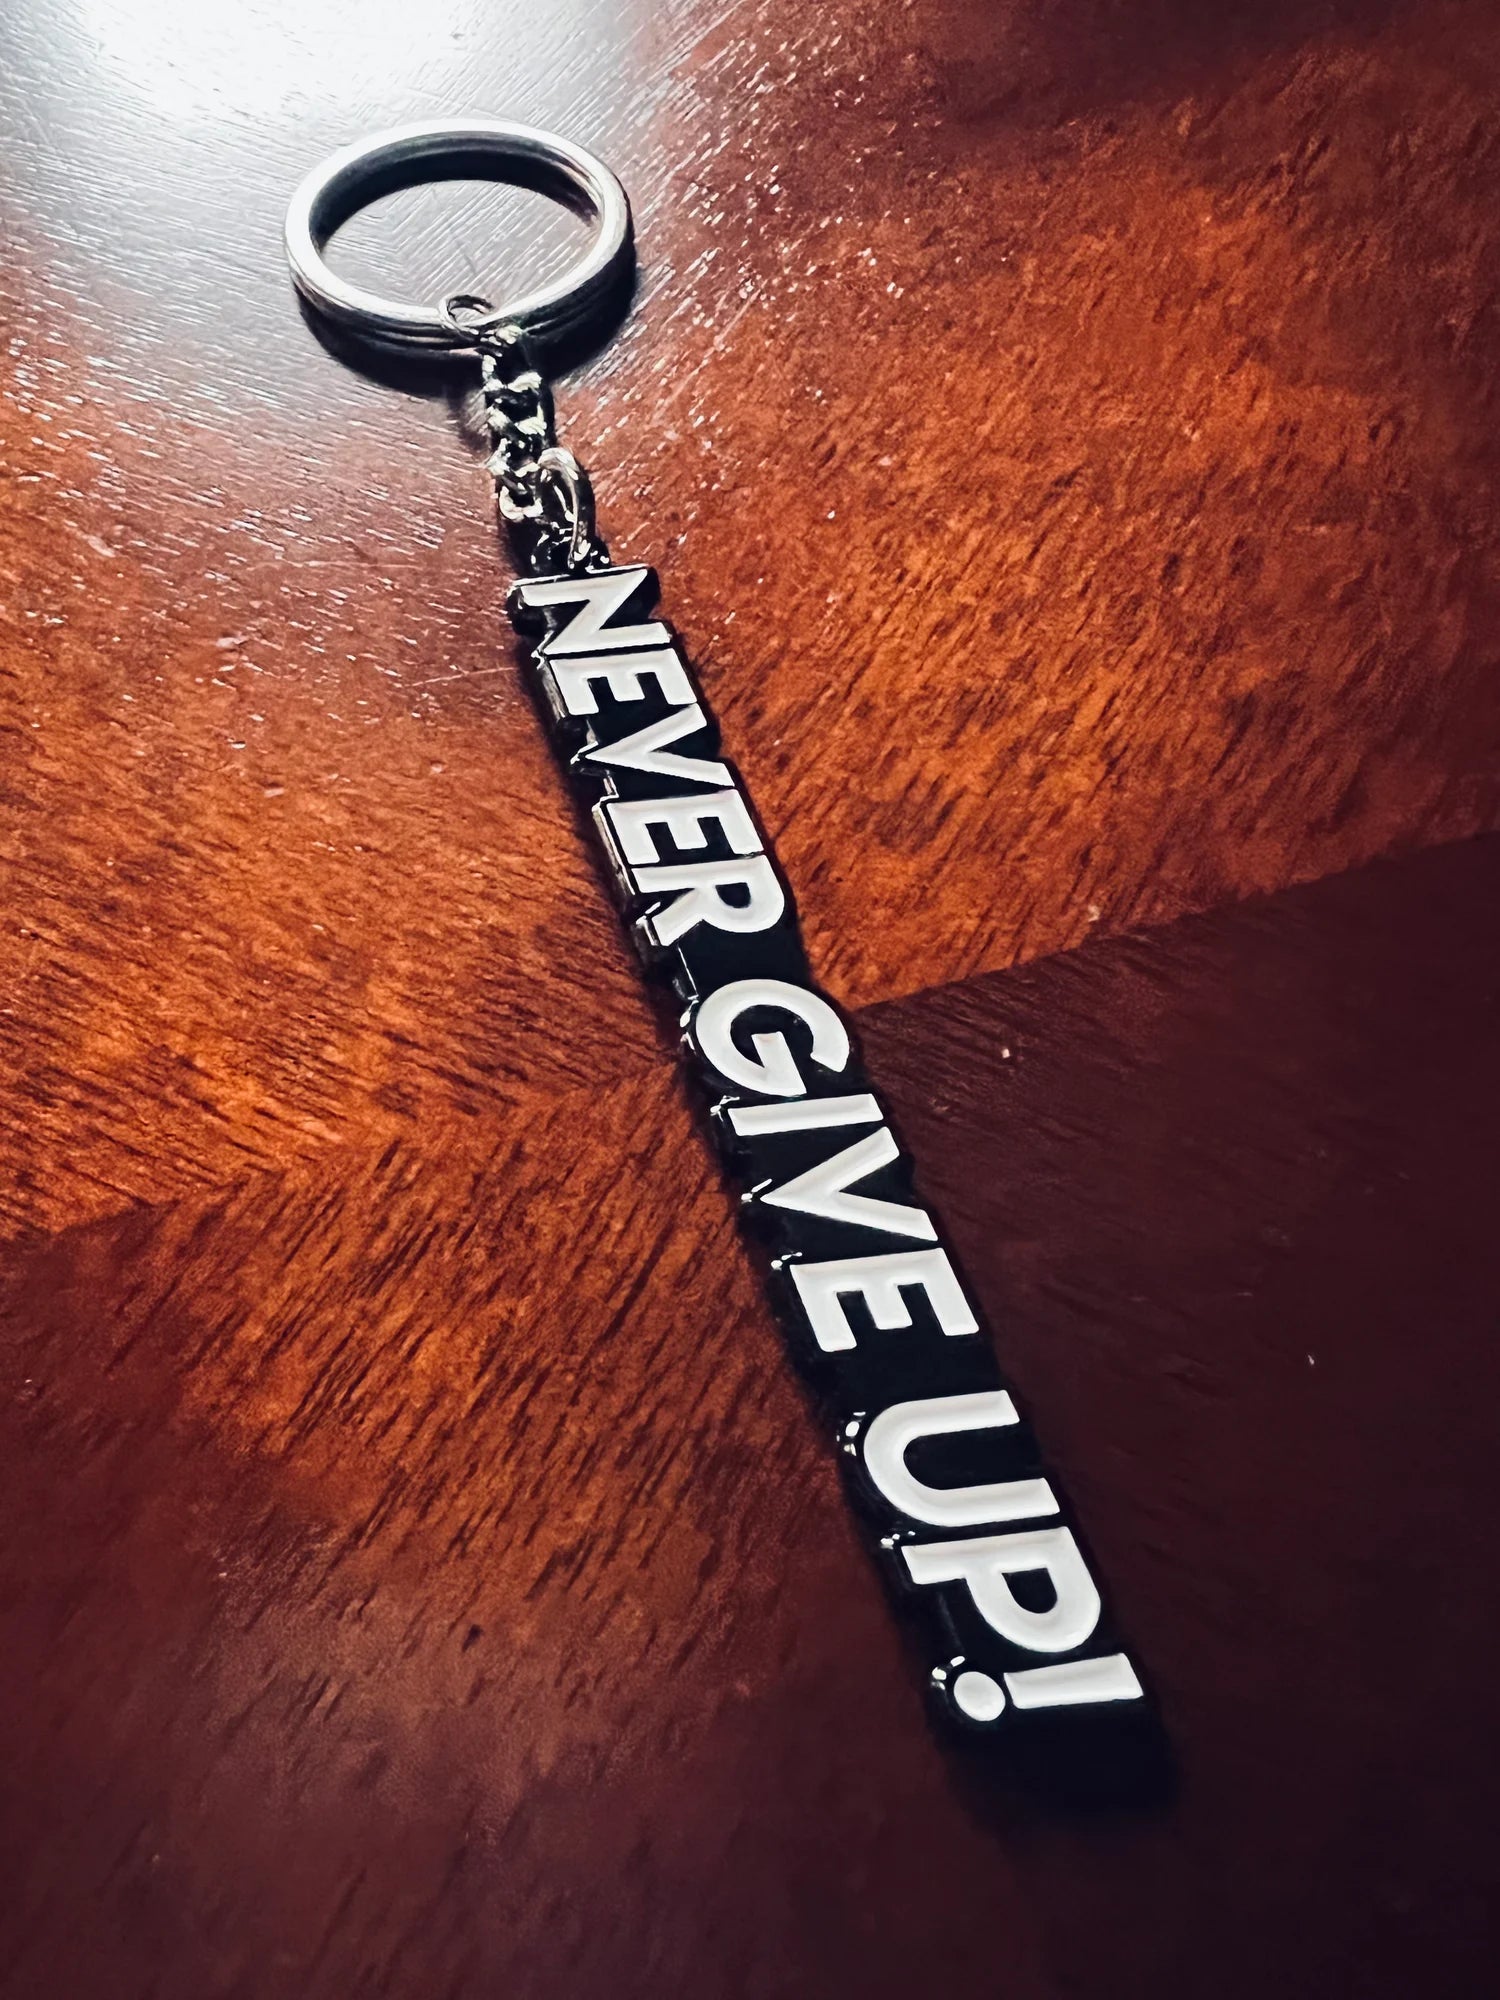 NEVER GIVE UP! - METAL KEYCHAIN